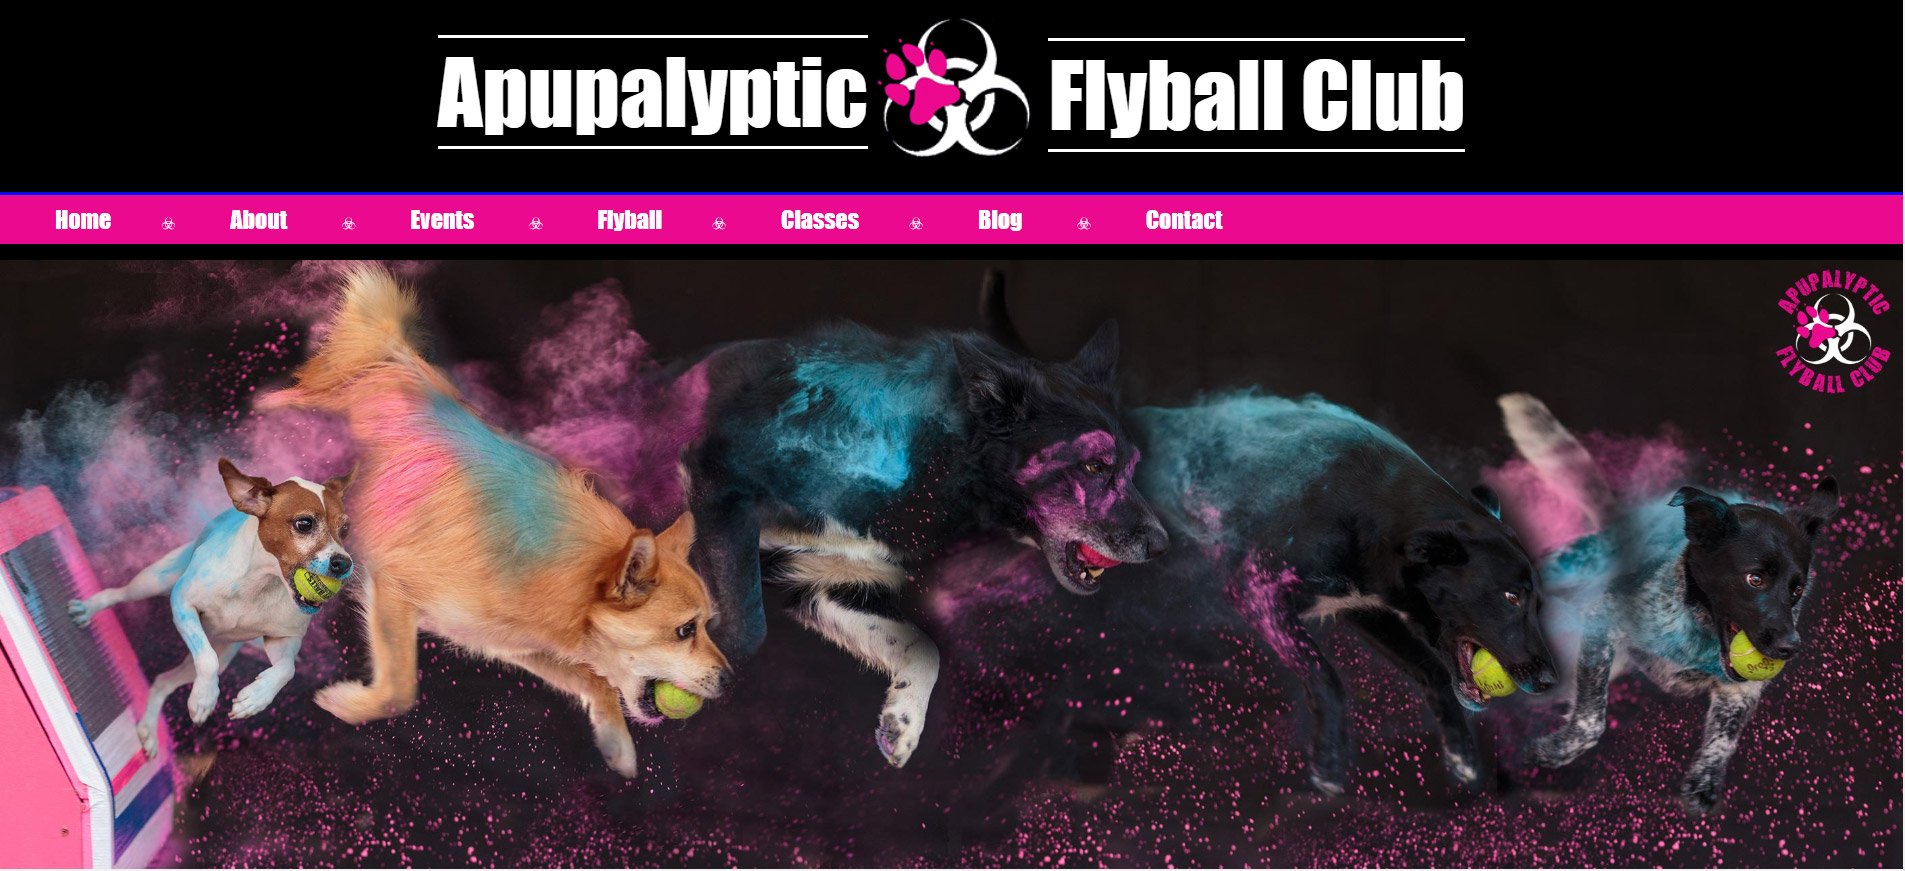 Apupalyptic Flyball